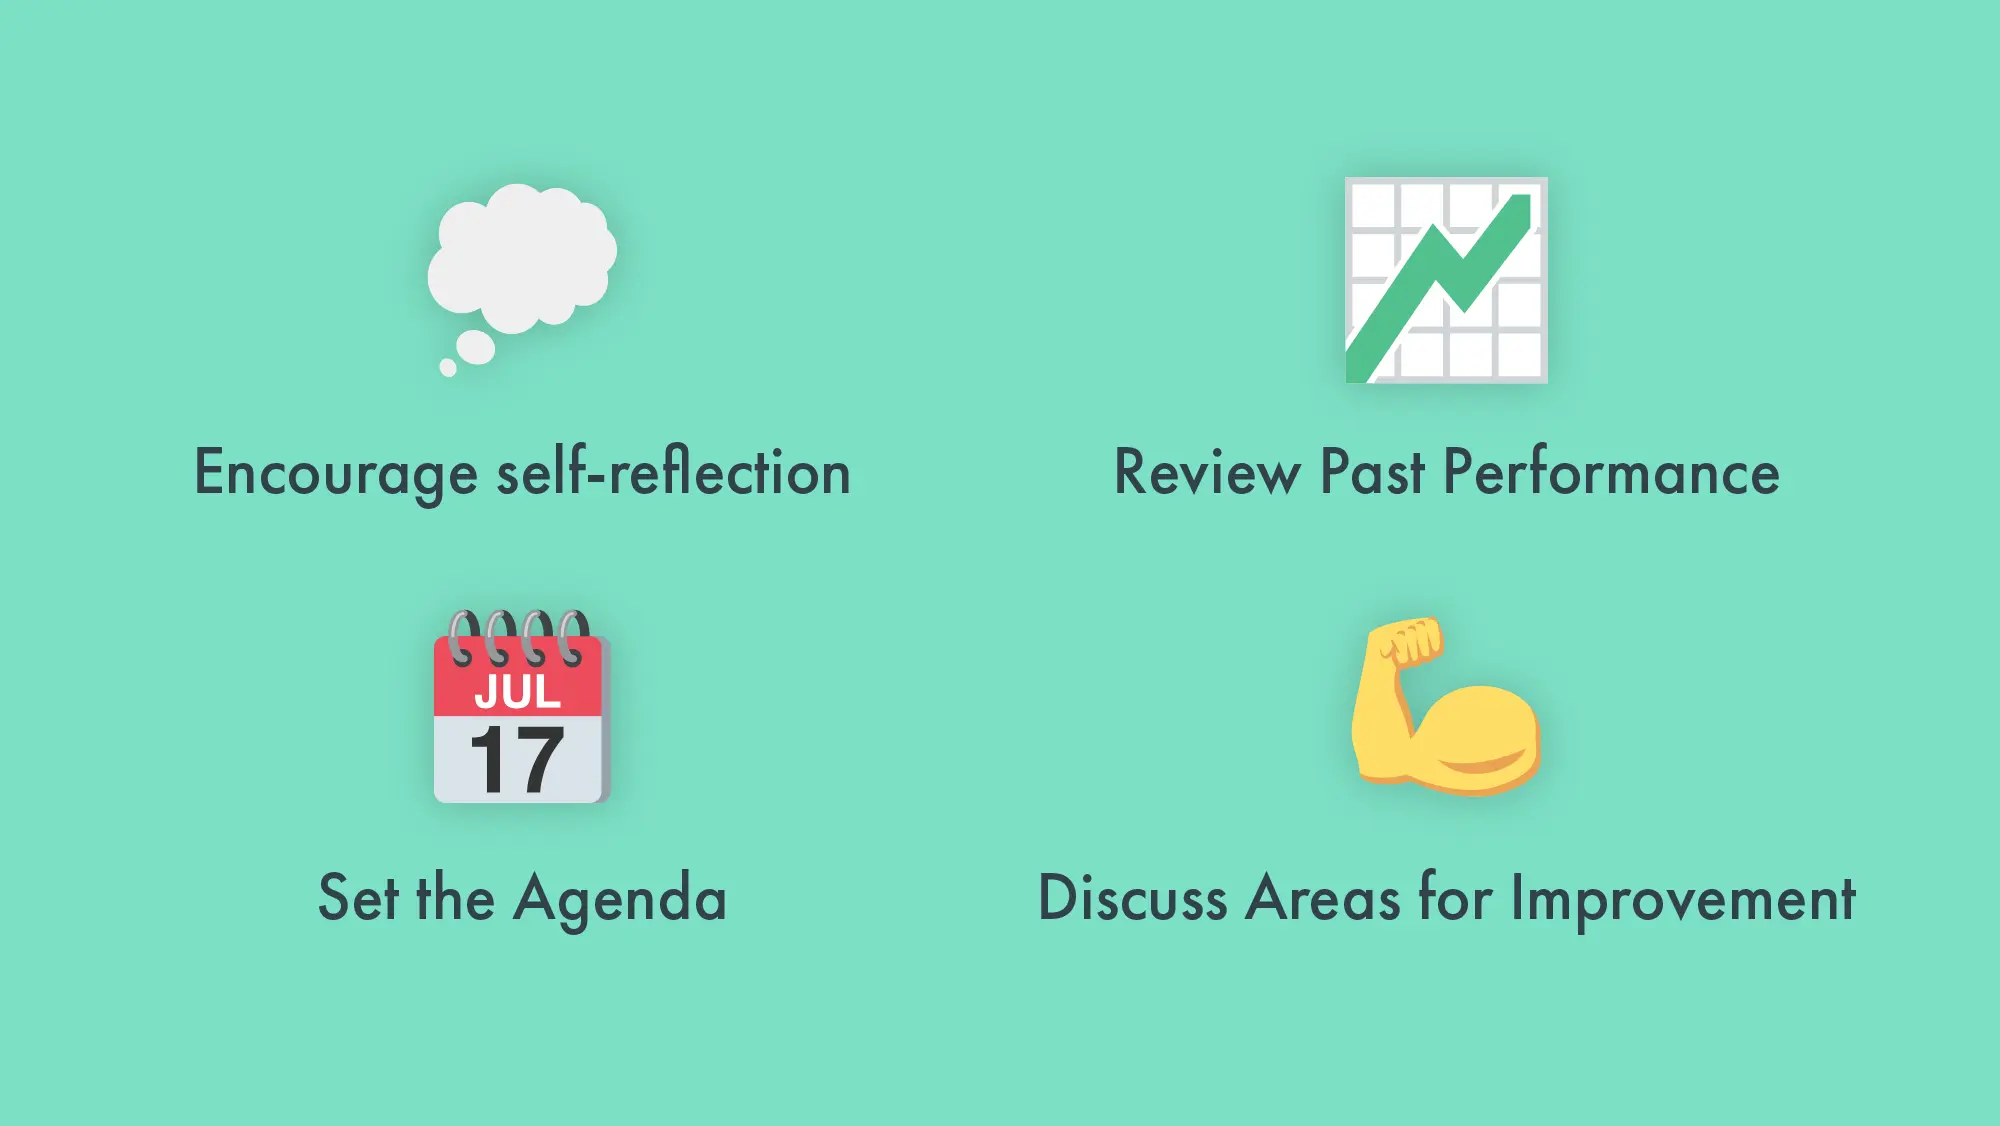 Summary of the 4 steps of performance reviews